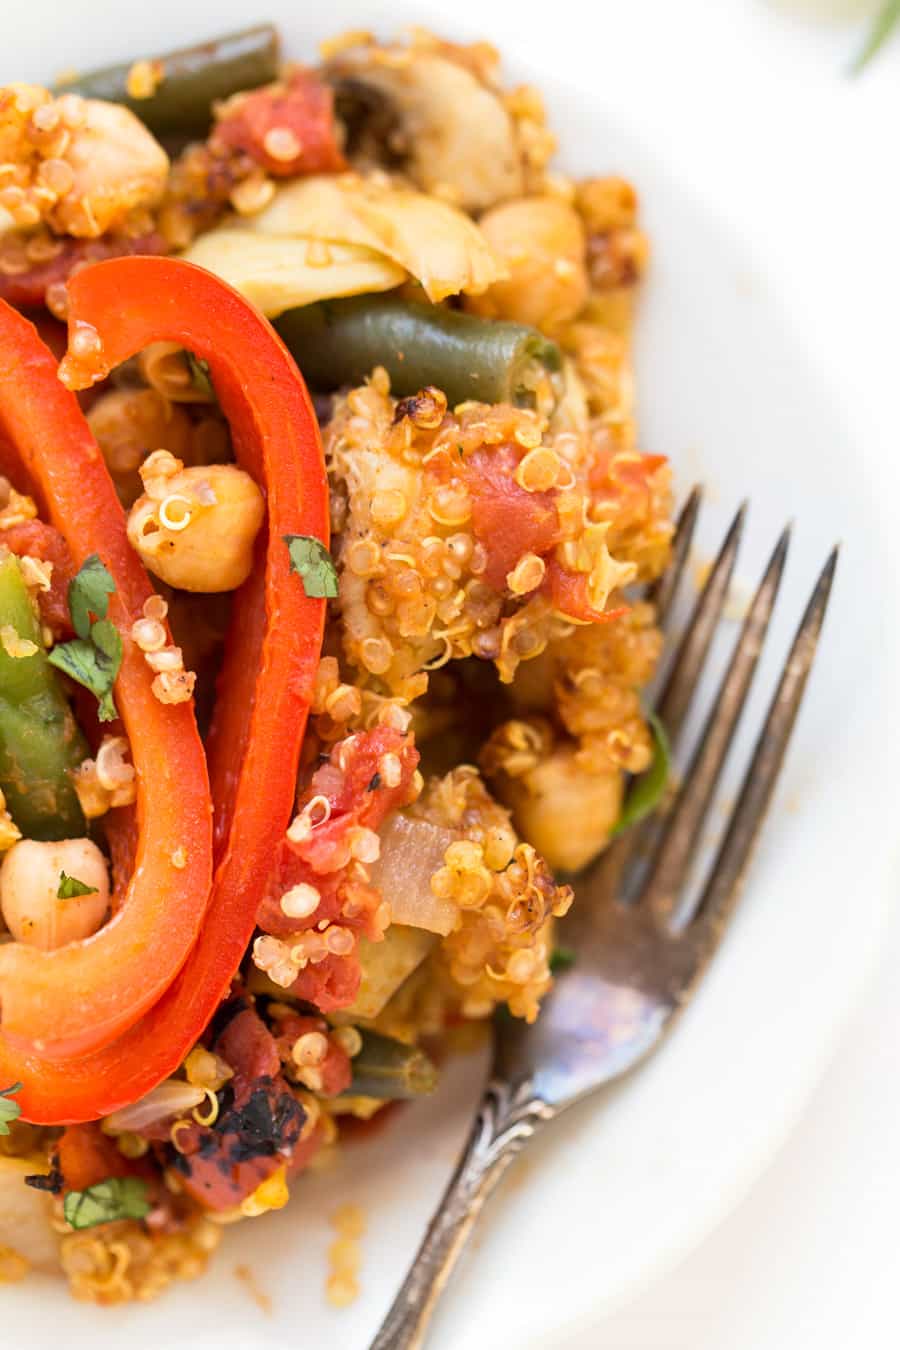 This ONE PAN Vegetable Quinoa Paella is a cinch to make and is ready in under 40 minutes!